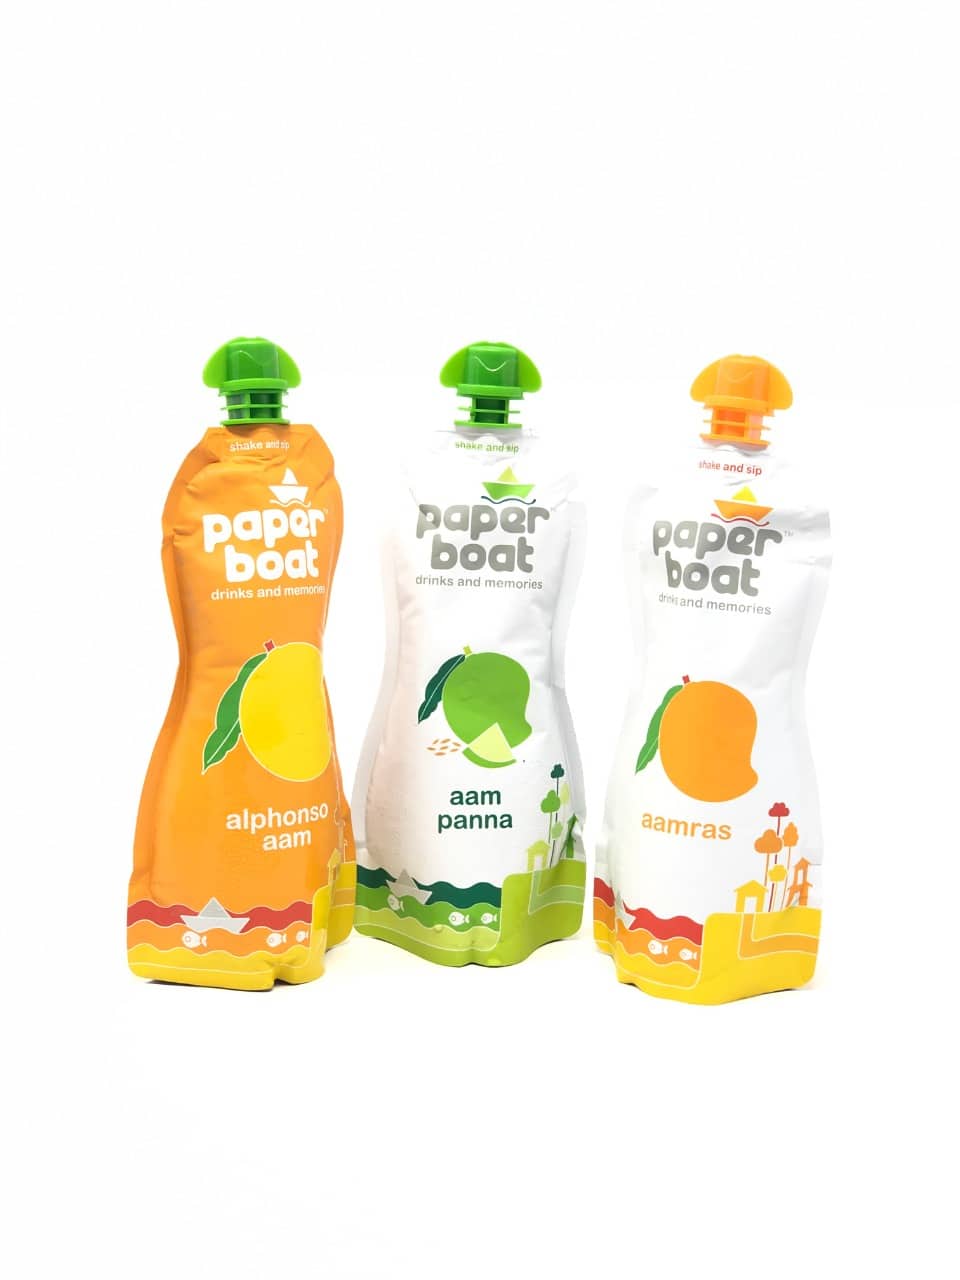 first impression of mango infused paperboat drinks